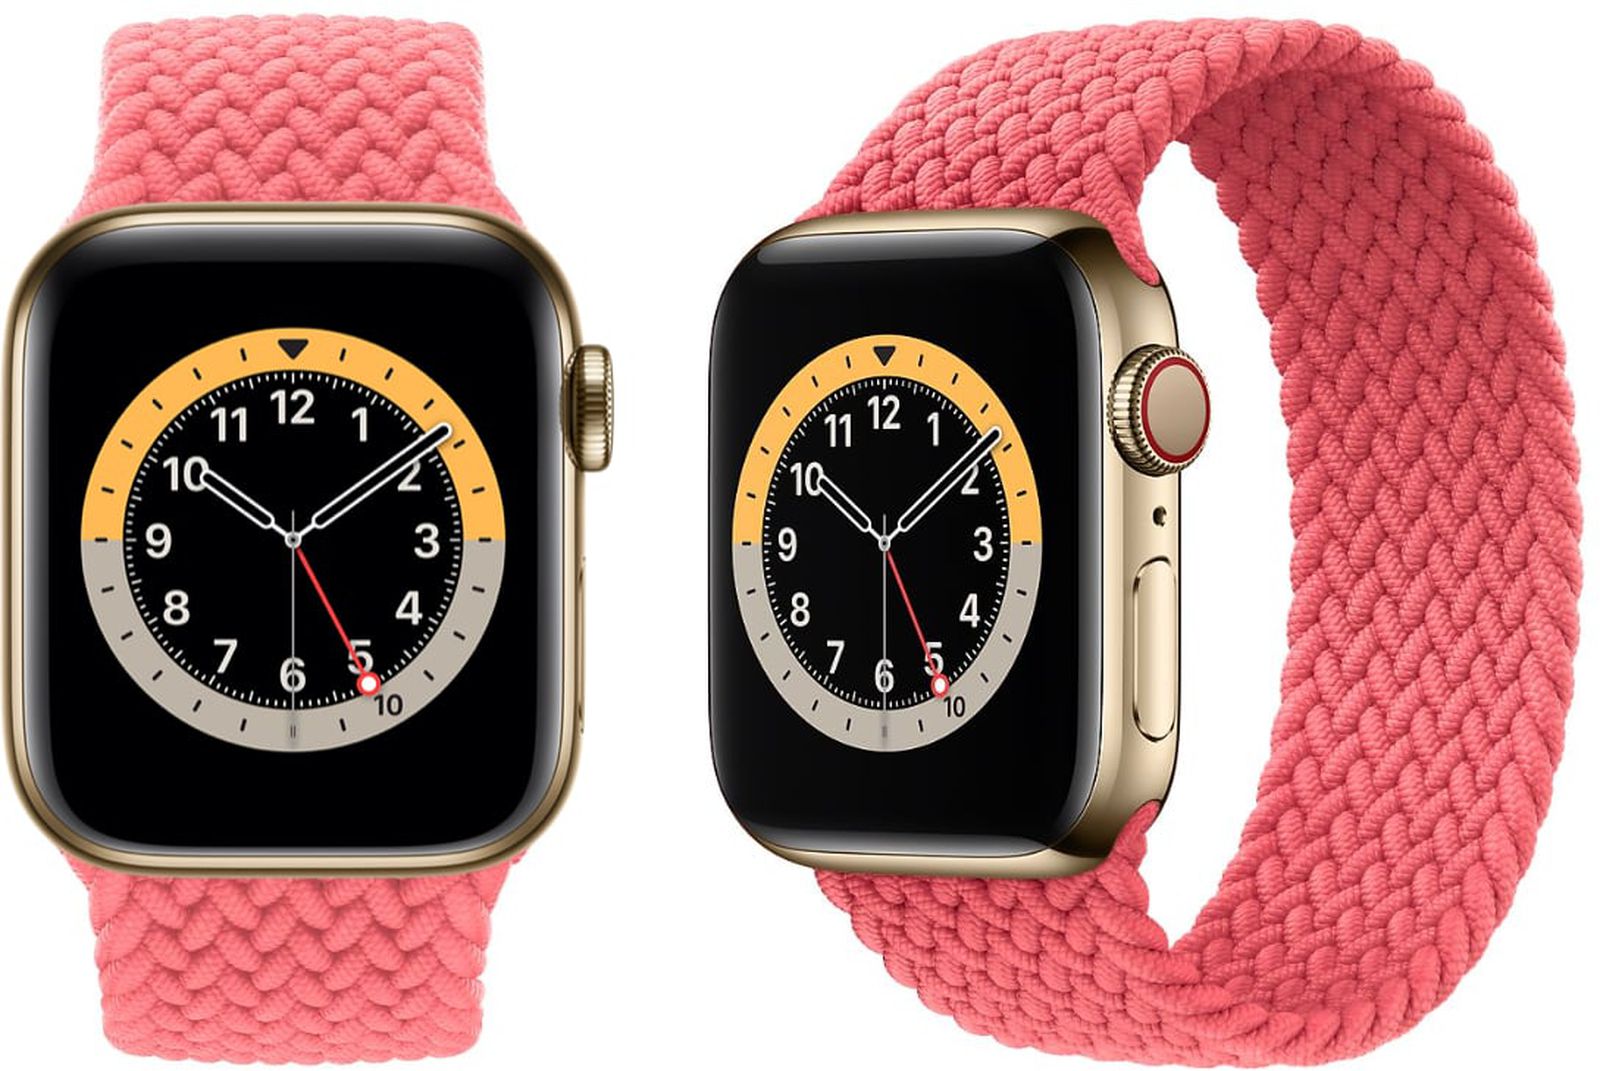 New concept imagines multi-colored Braided Solo Loop bands for Apple Watch